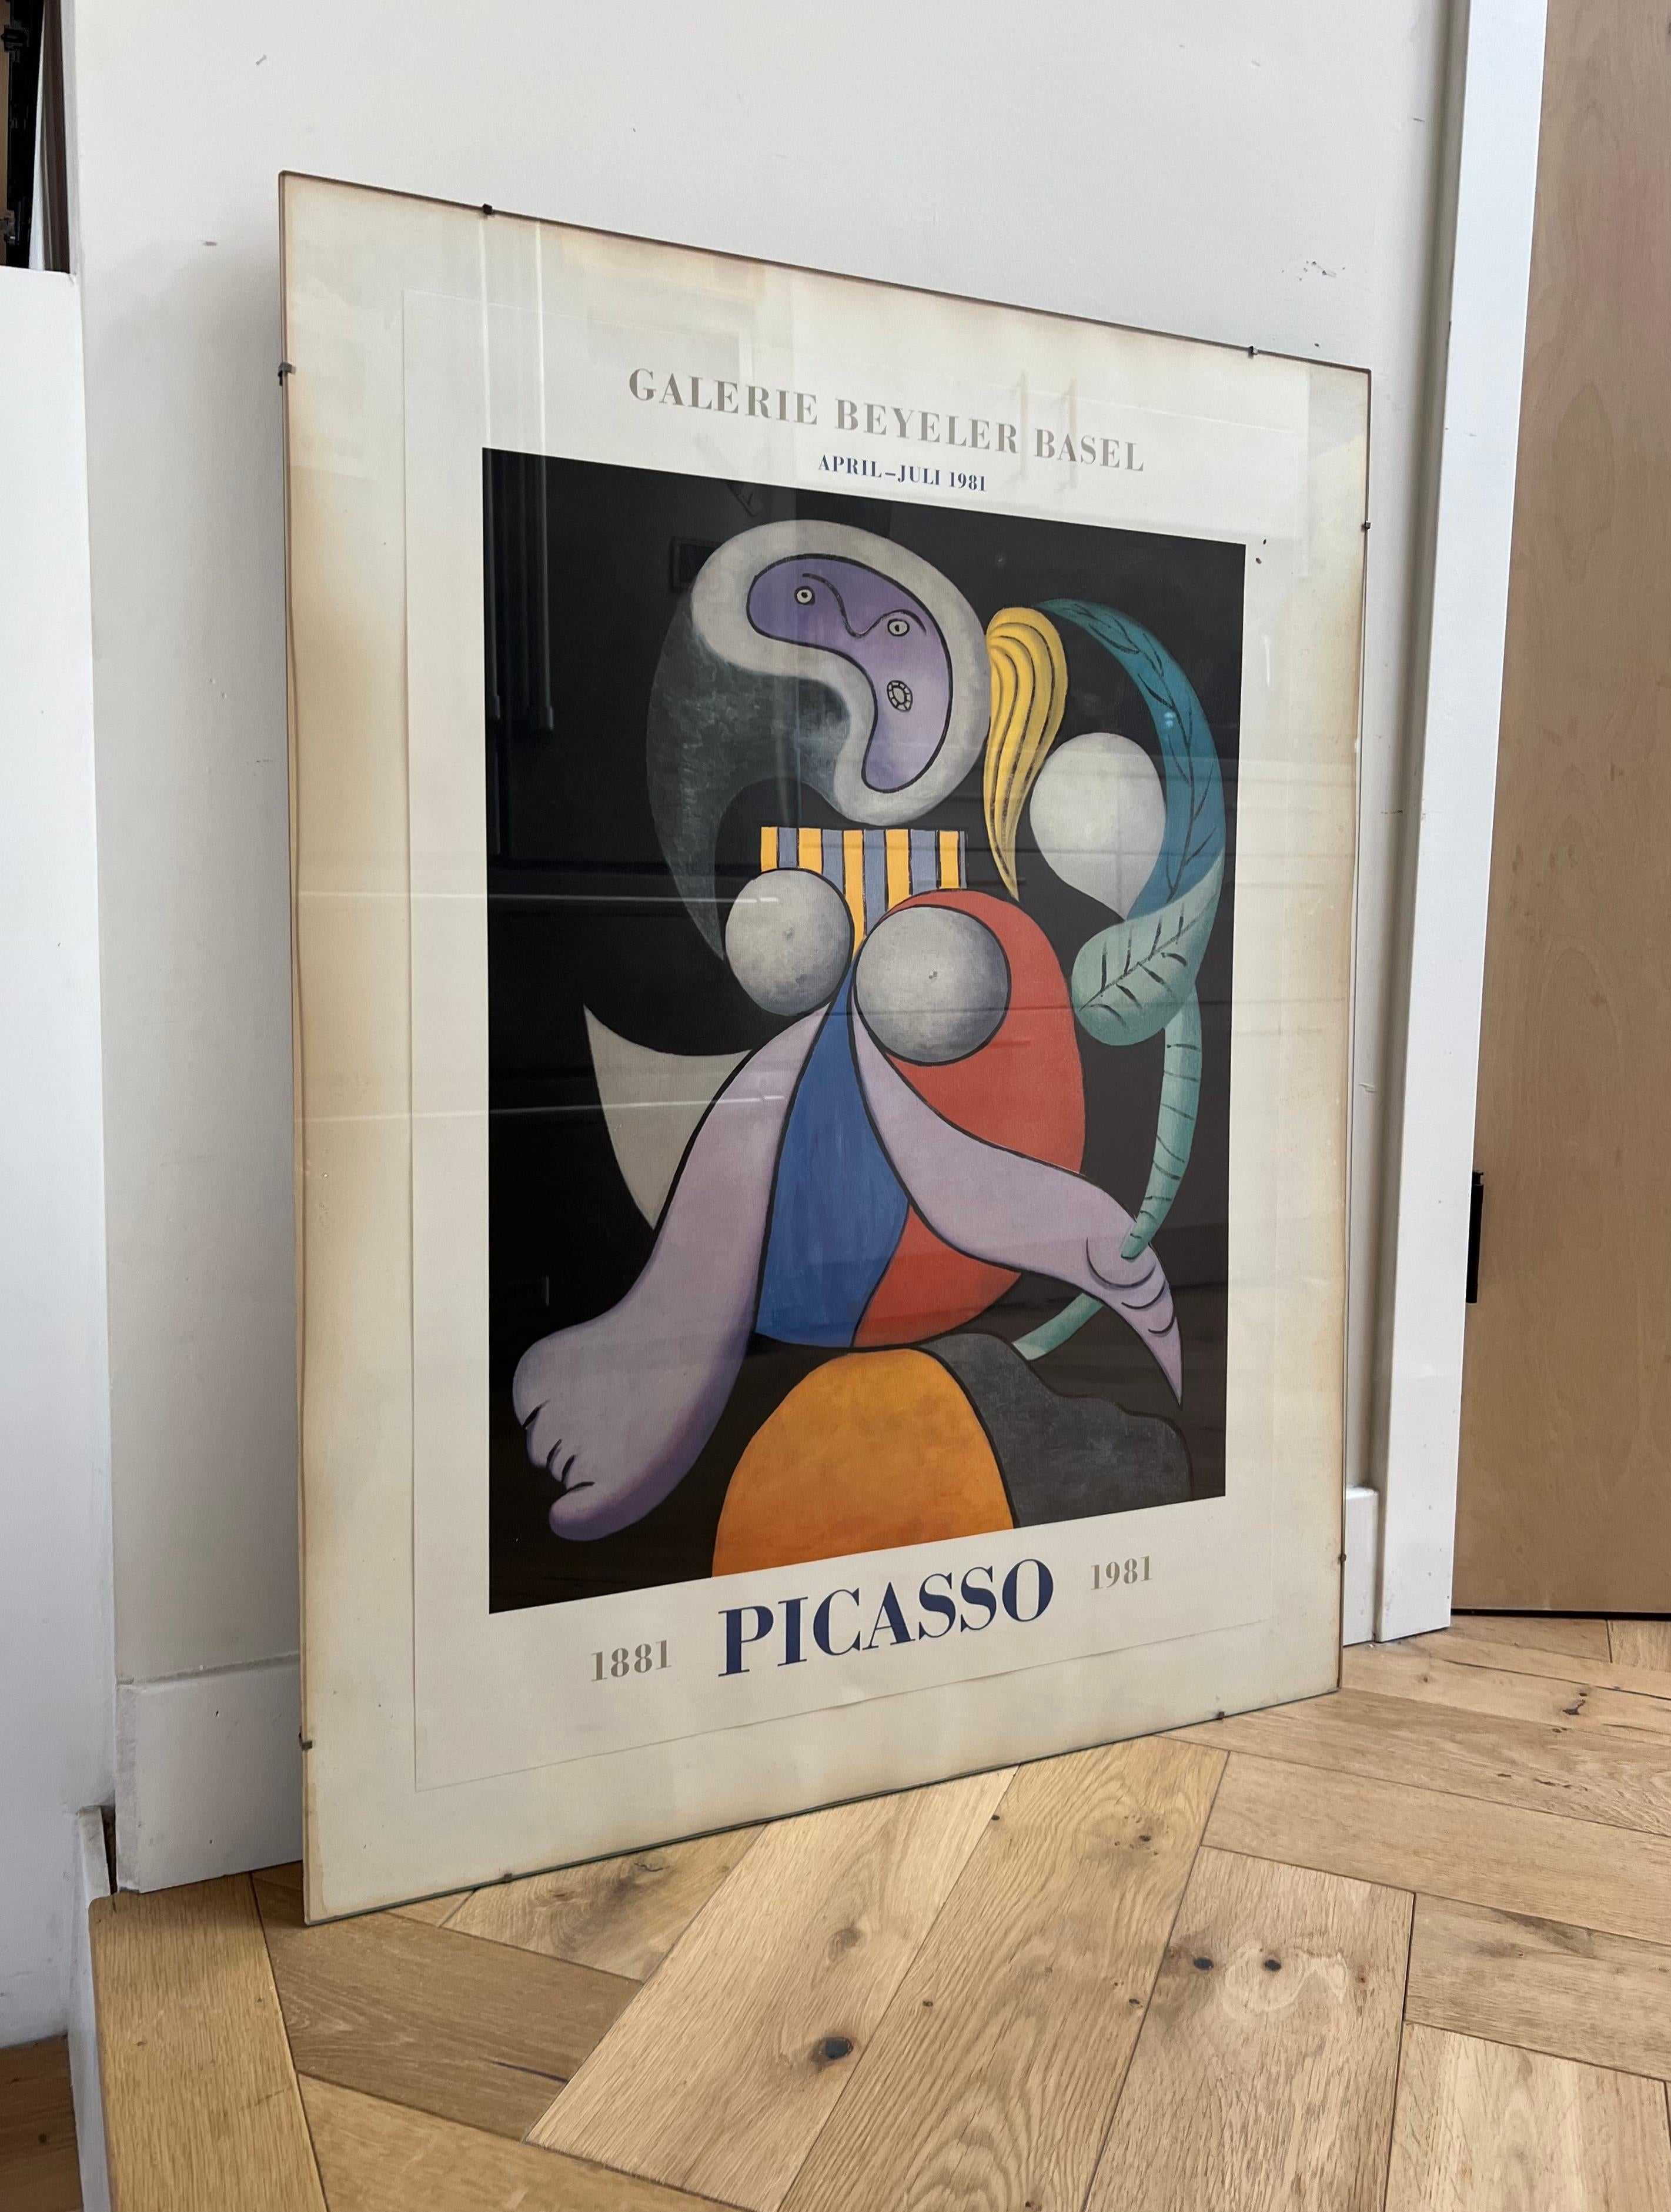 Glass Large Vintage Picasso Exhibition Poster, beind glass, Basel 1981 For Sale